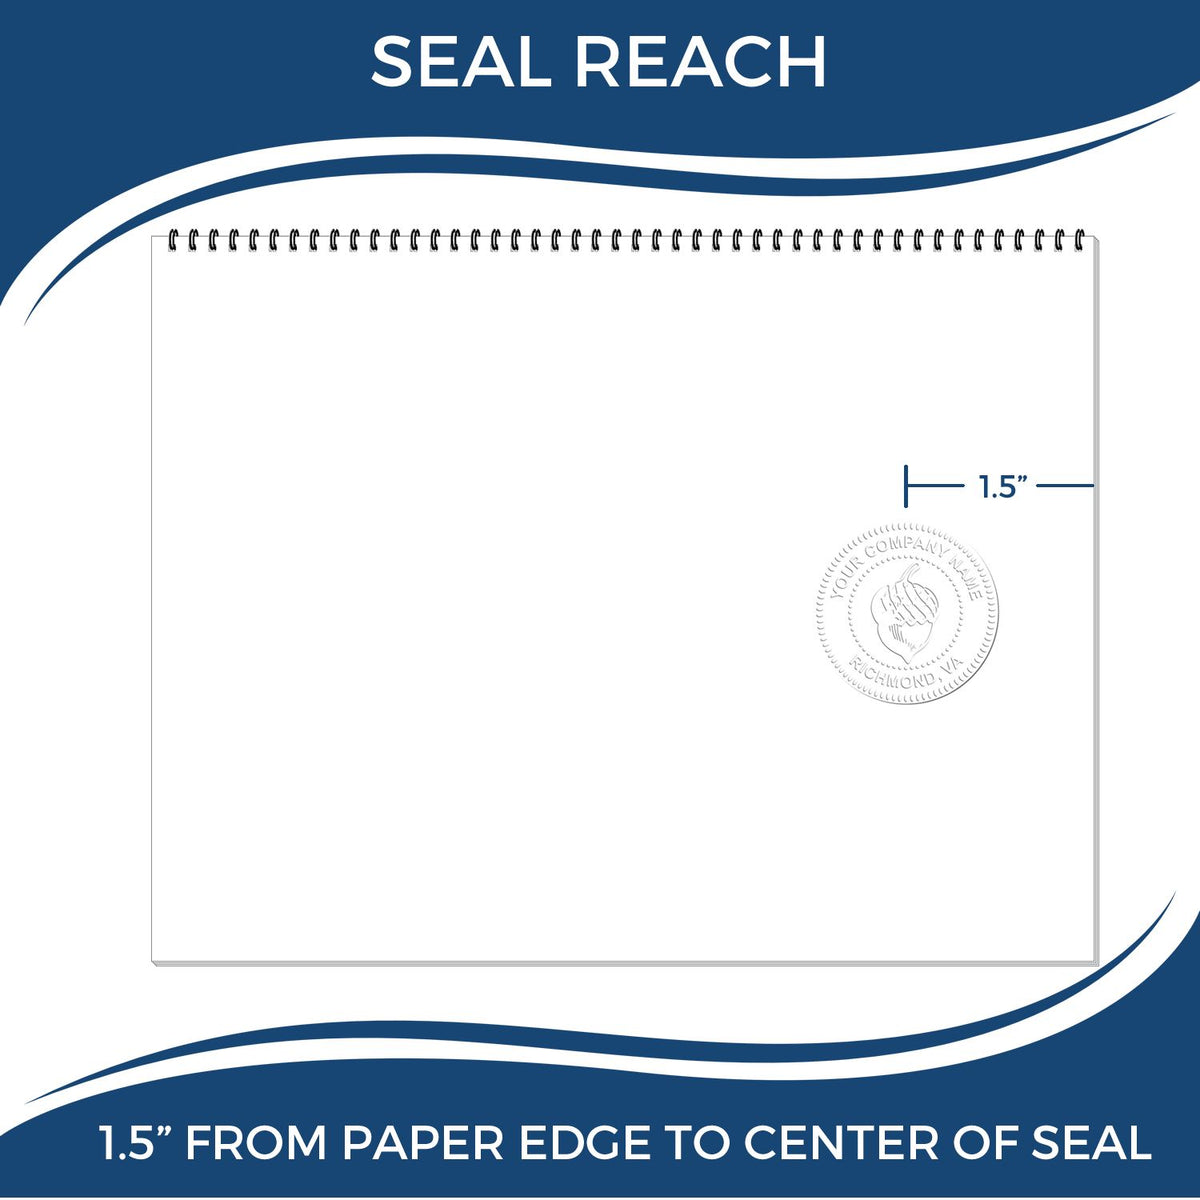 An infographic showing the seal reach which is represented by a ruler and a miniature seal image of the Handheld Colorado Architect Seal Embosser